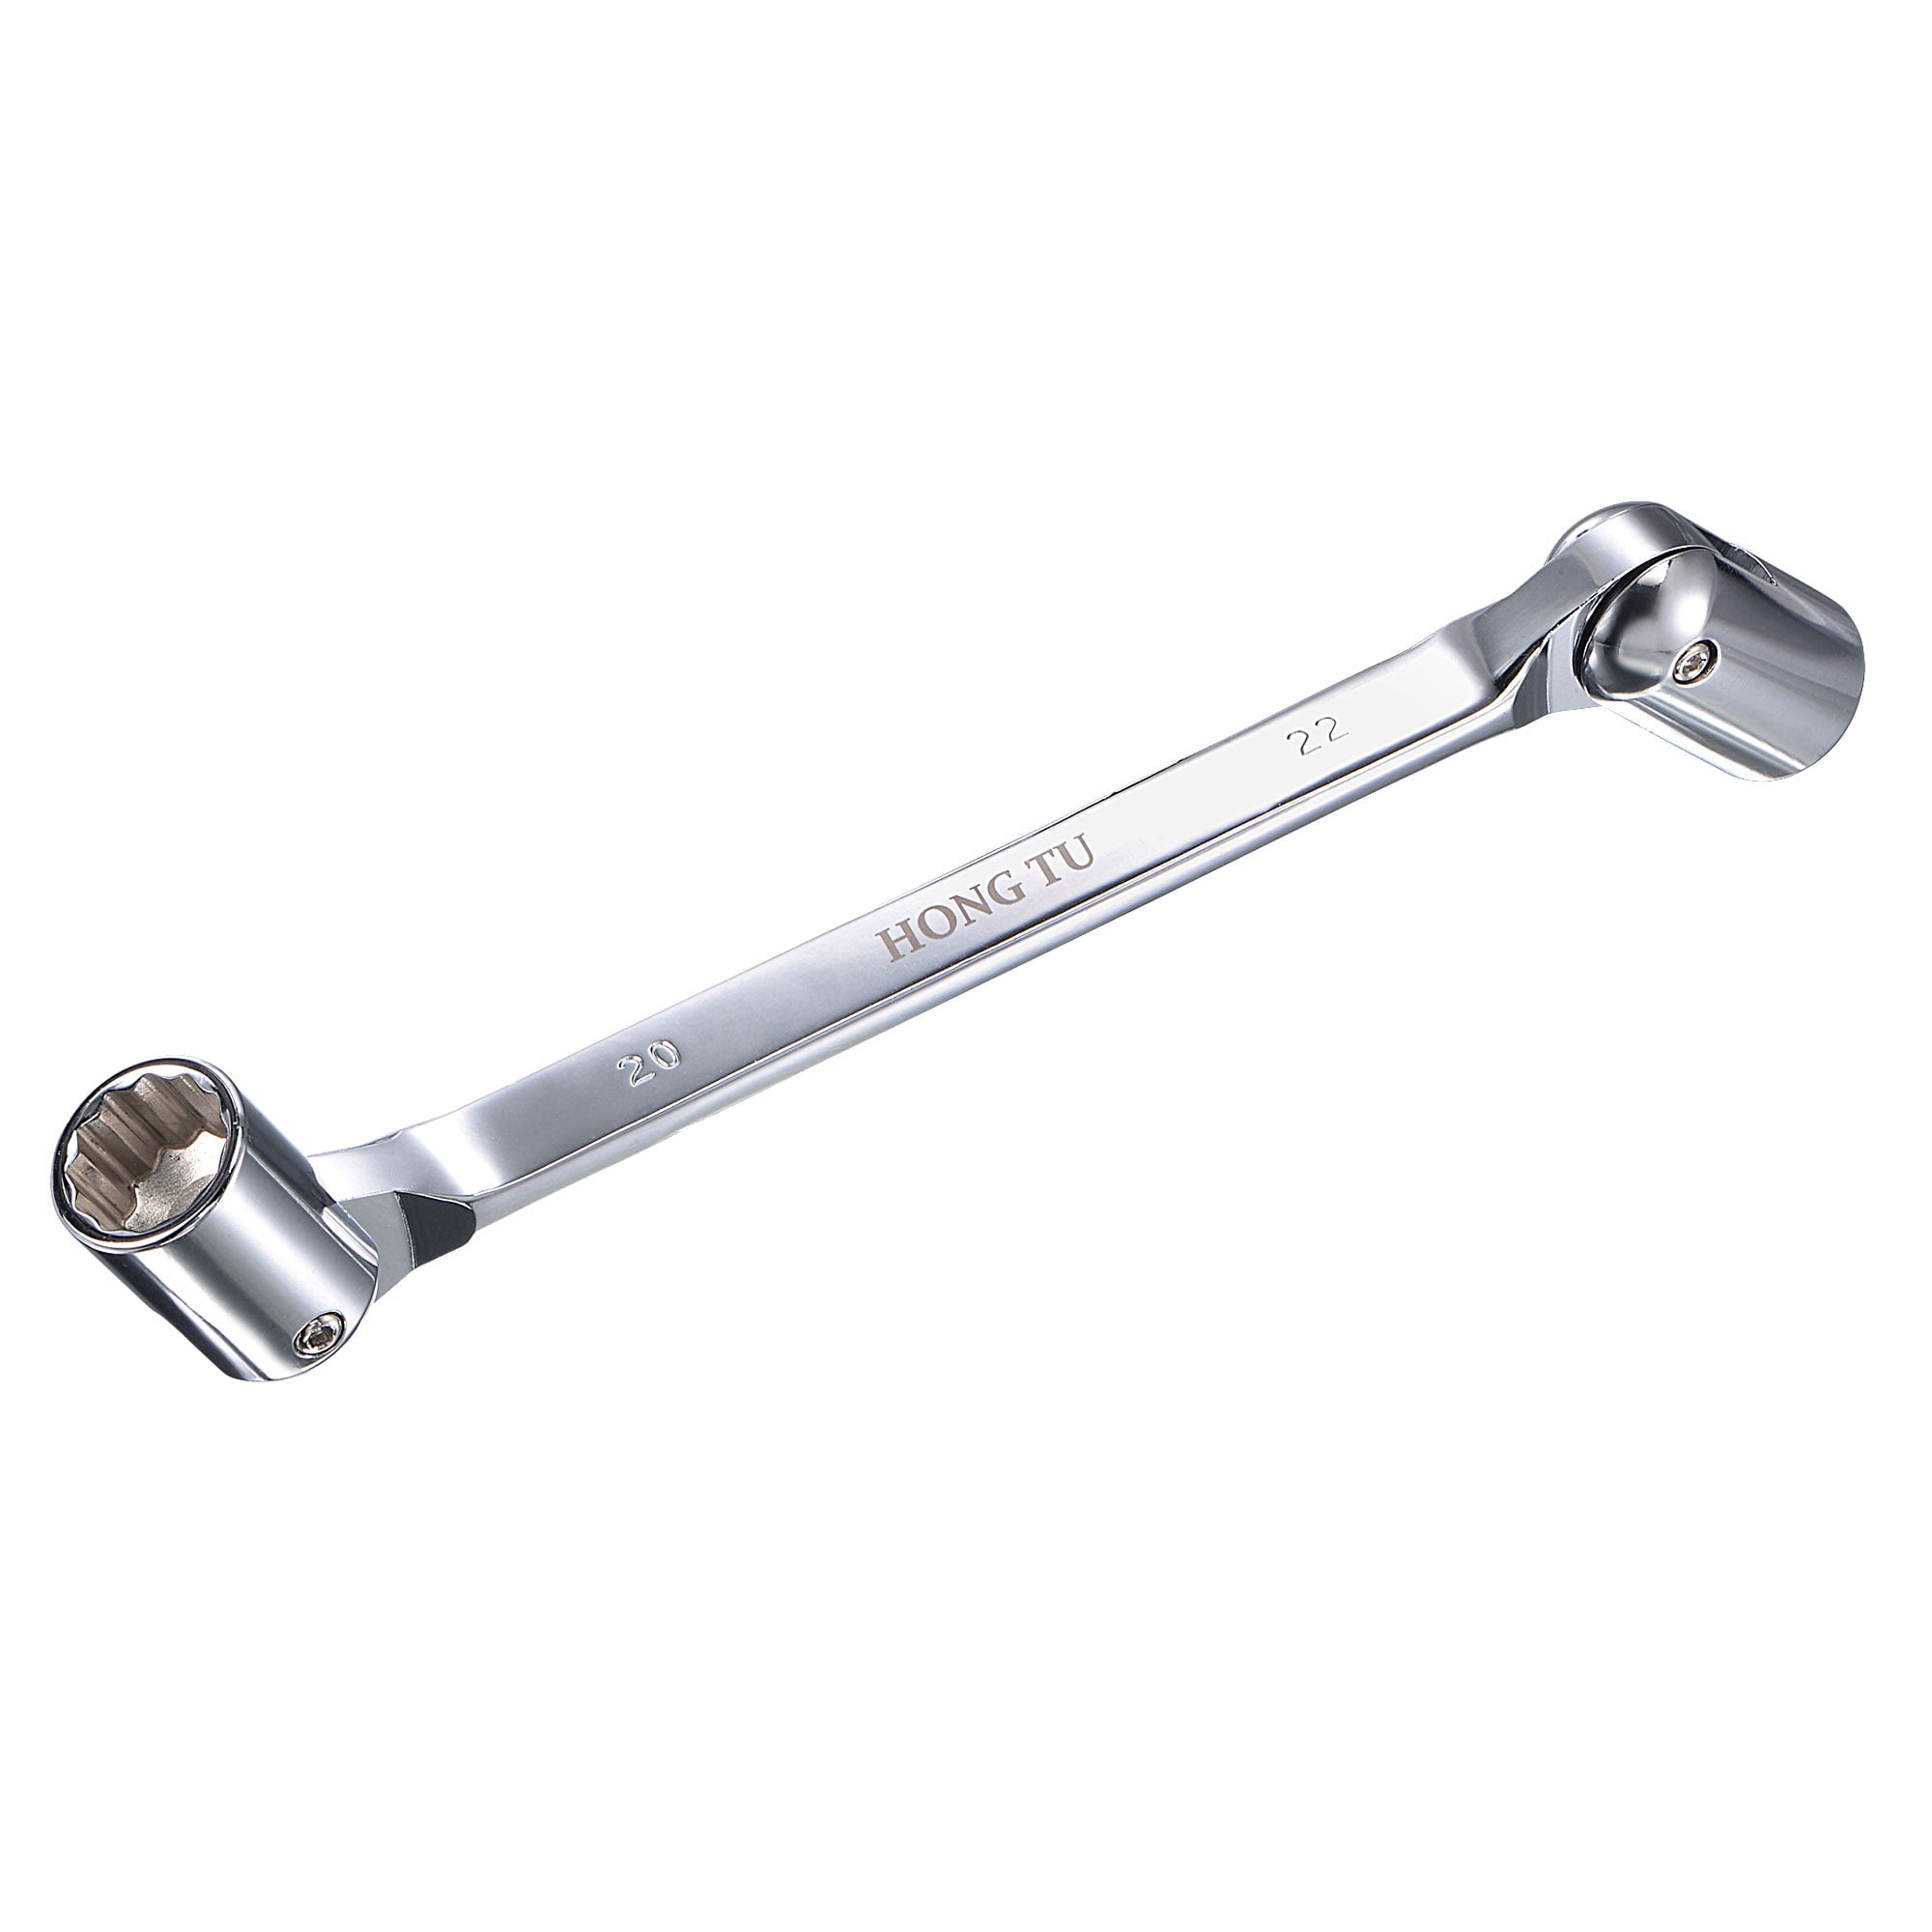 Chrome Plated L Shaped Double End Hex Socket Wrench Metric 7mm 